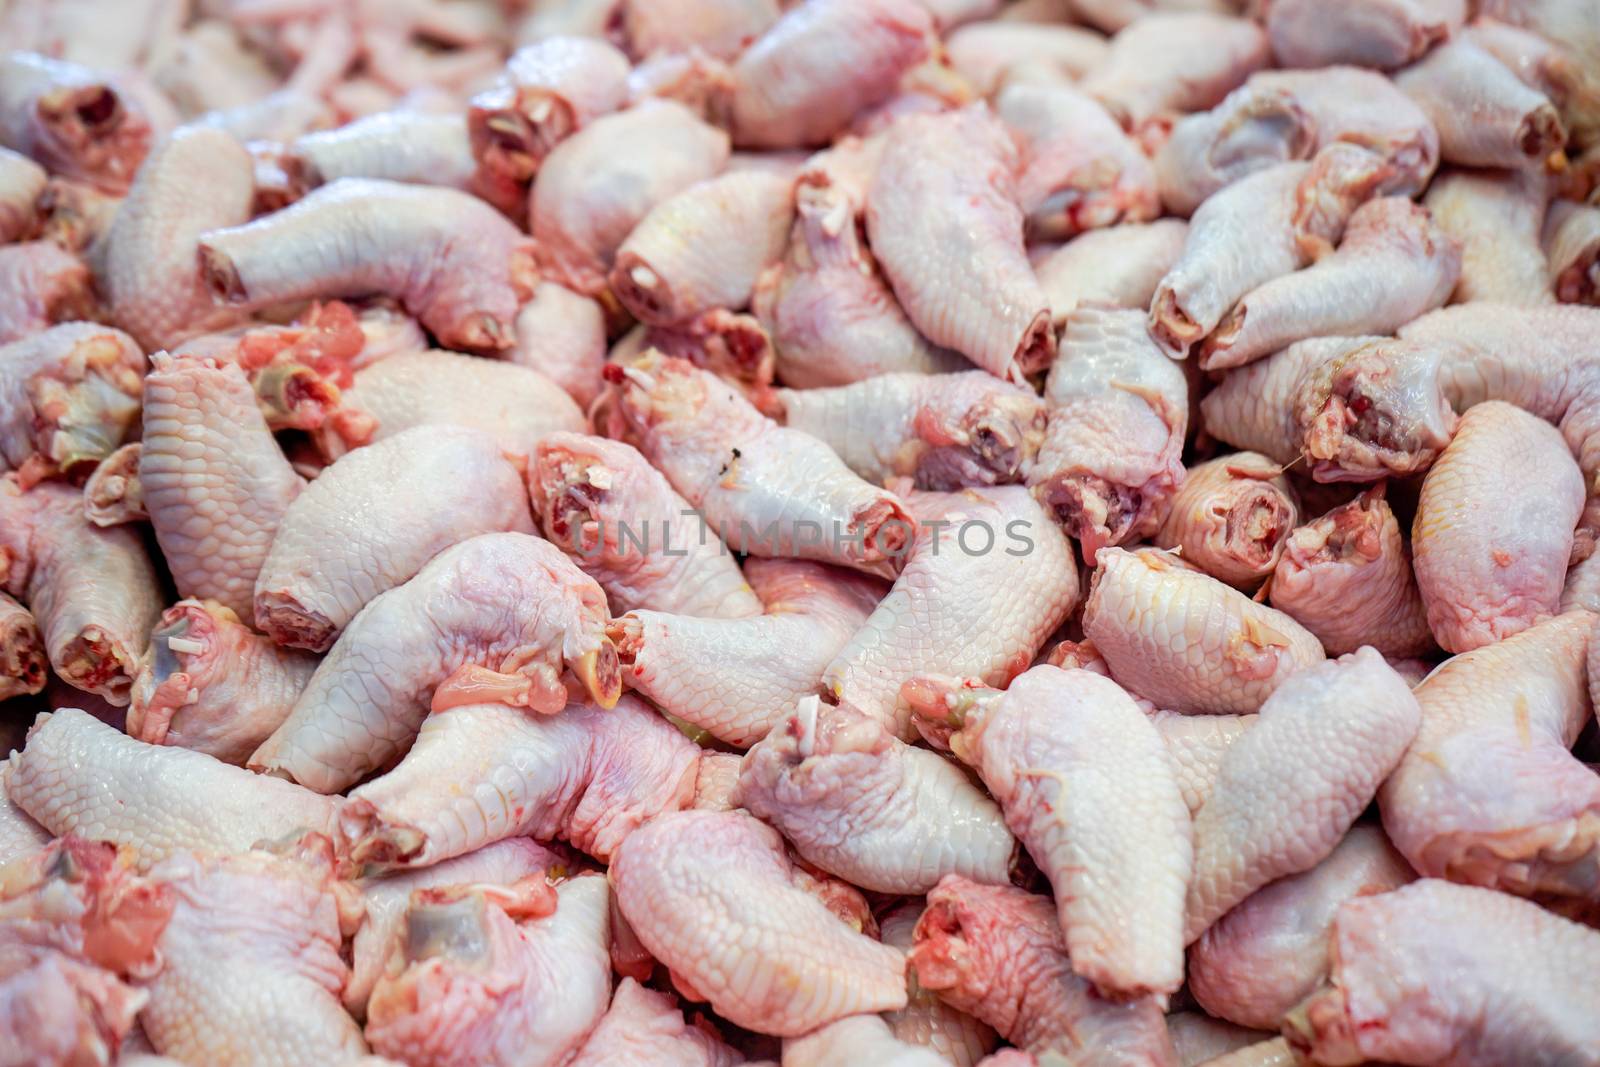 raw chicken cartilage of joints by antpkr